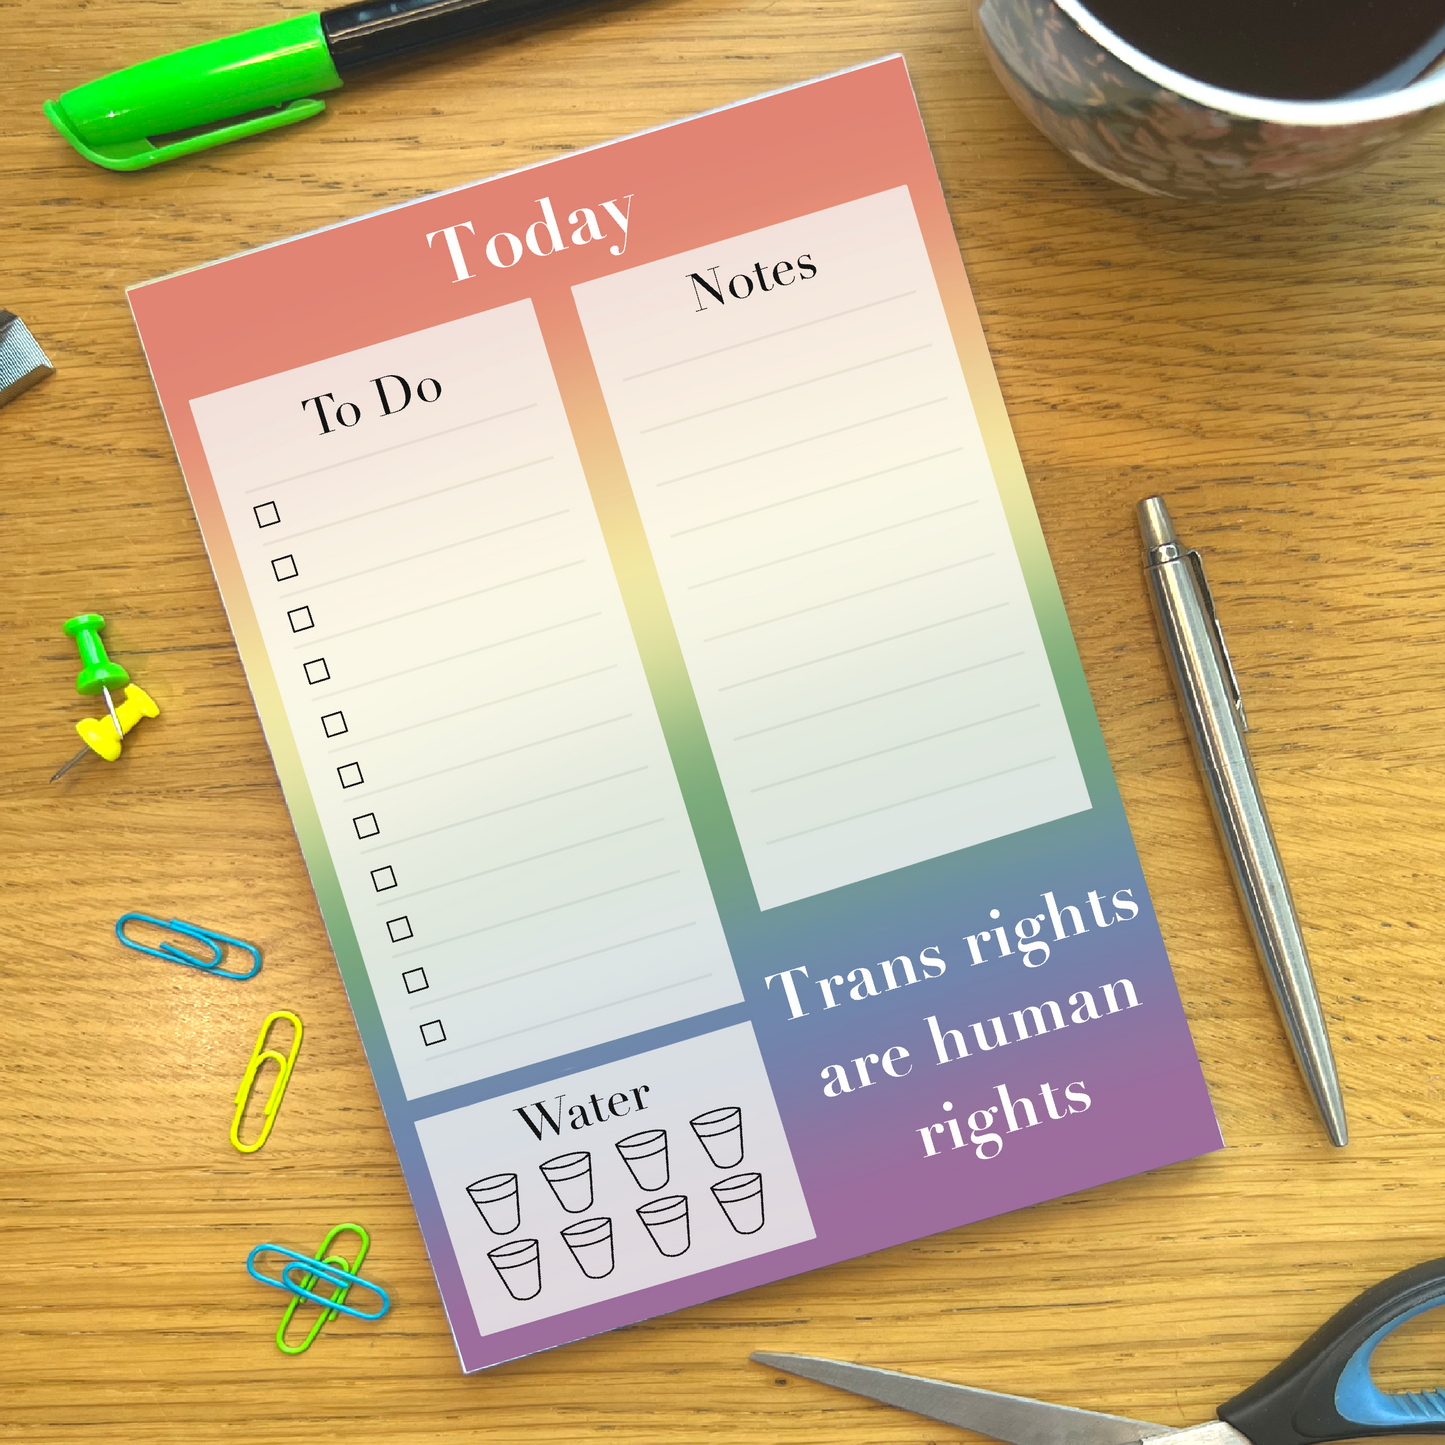 LGBTQIA+ Pride Flag Planner featuring To Do list section, Note section, Water section with 7 glass icons, and a quote saying Trans rights are human rights